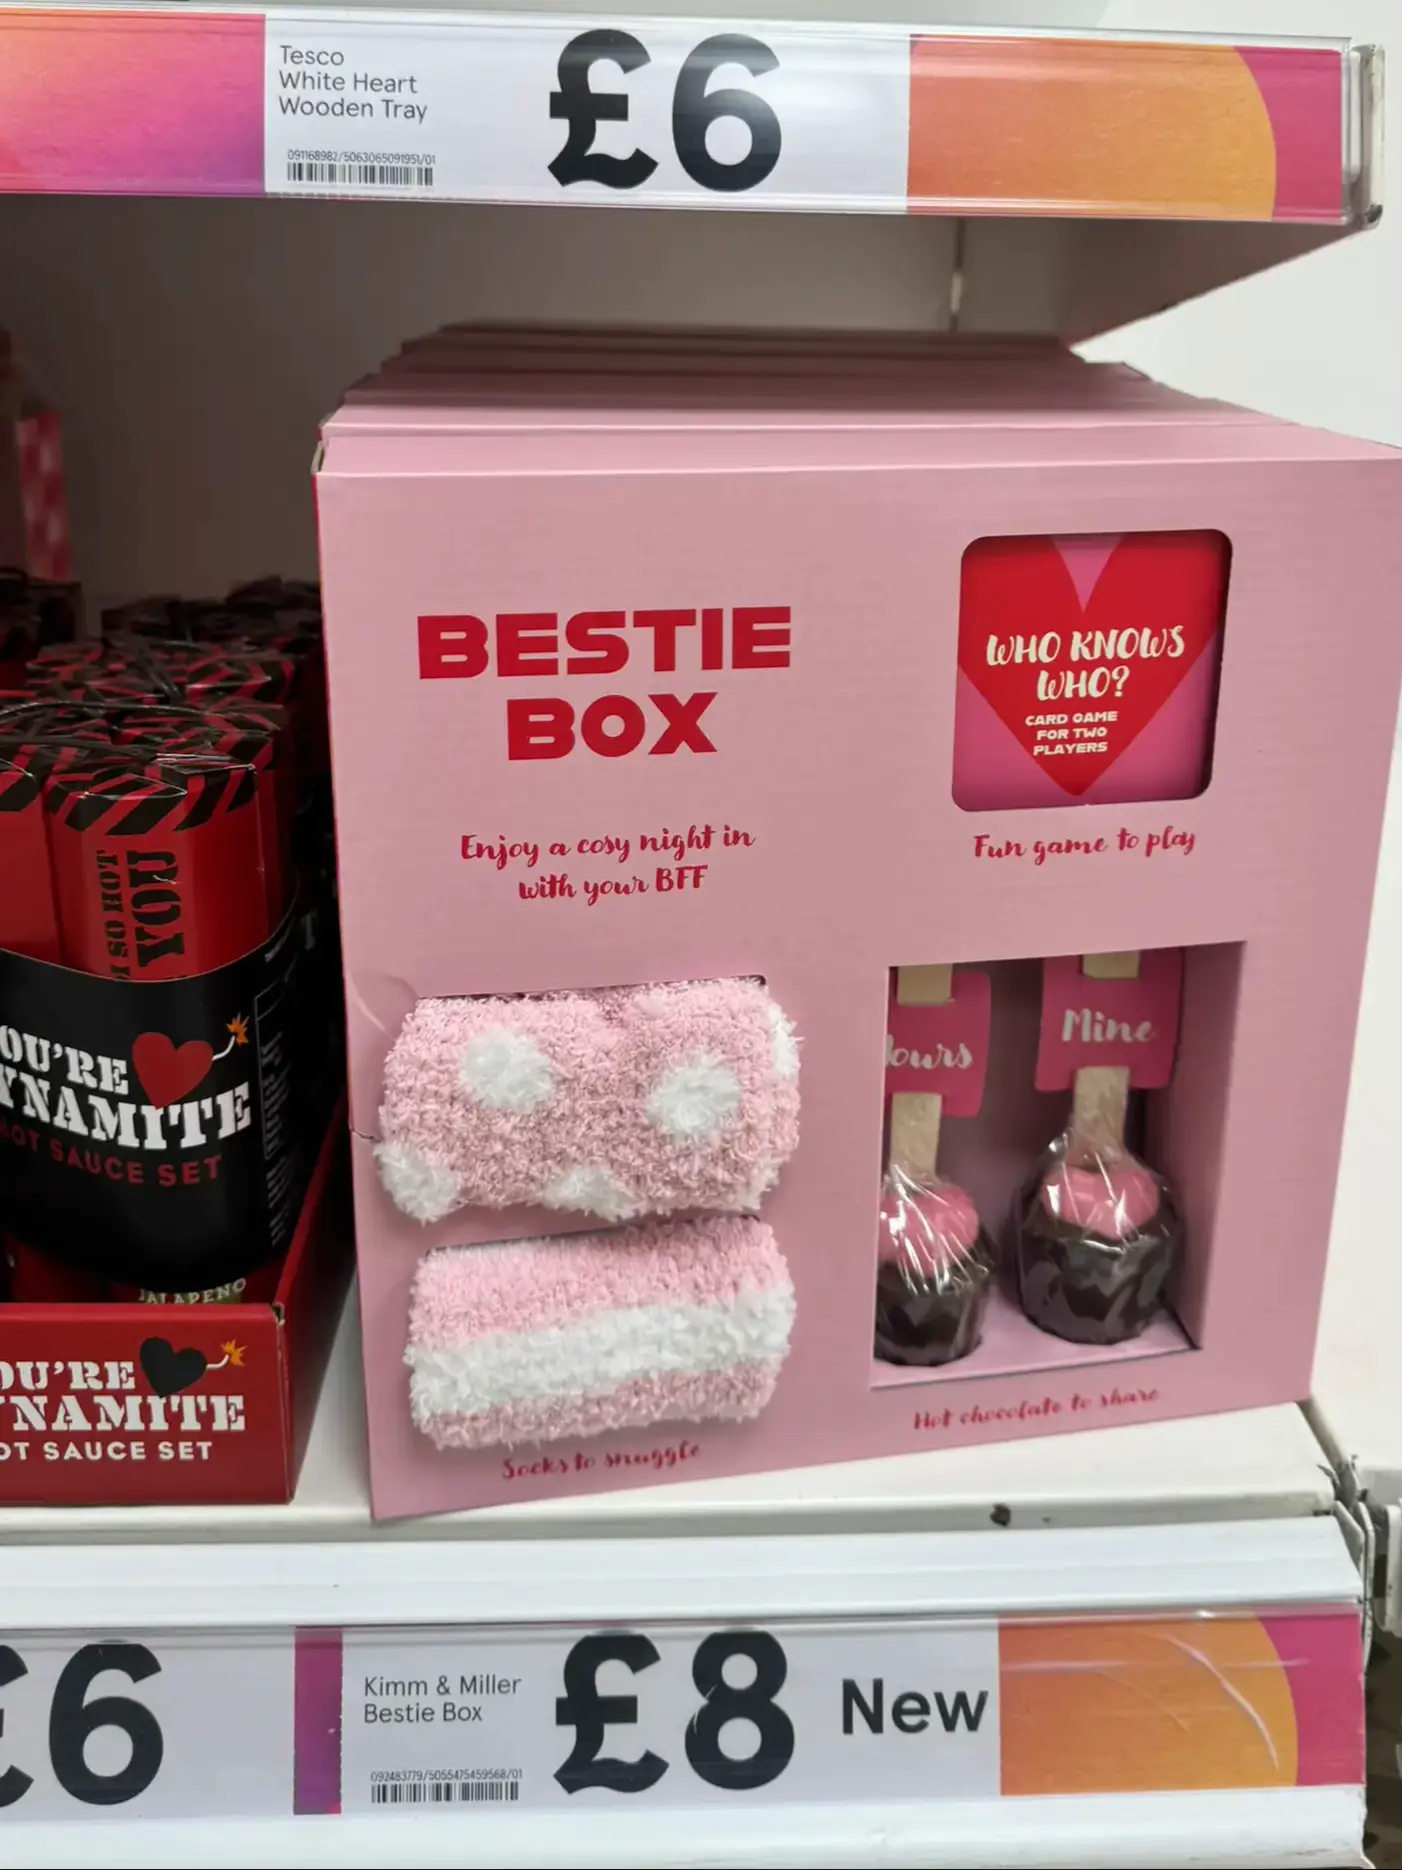 F&F at Tesco have a new Valentine's collection – and it's simply